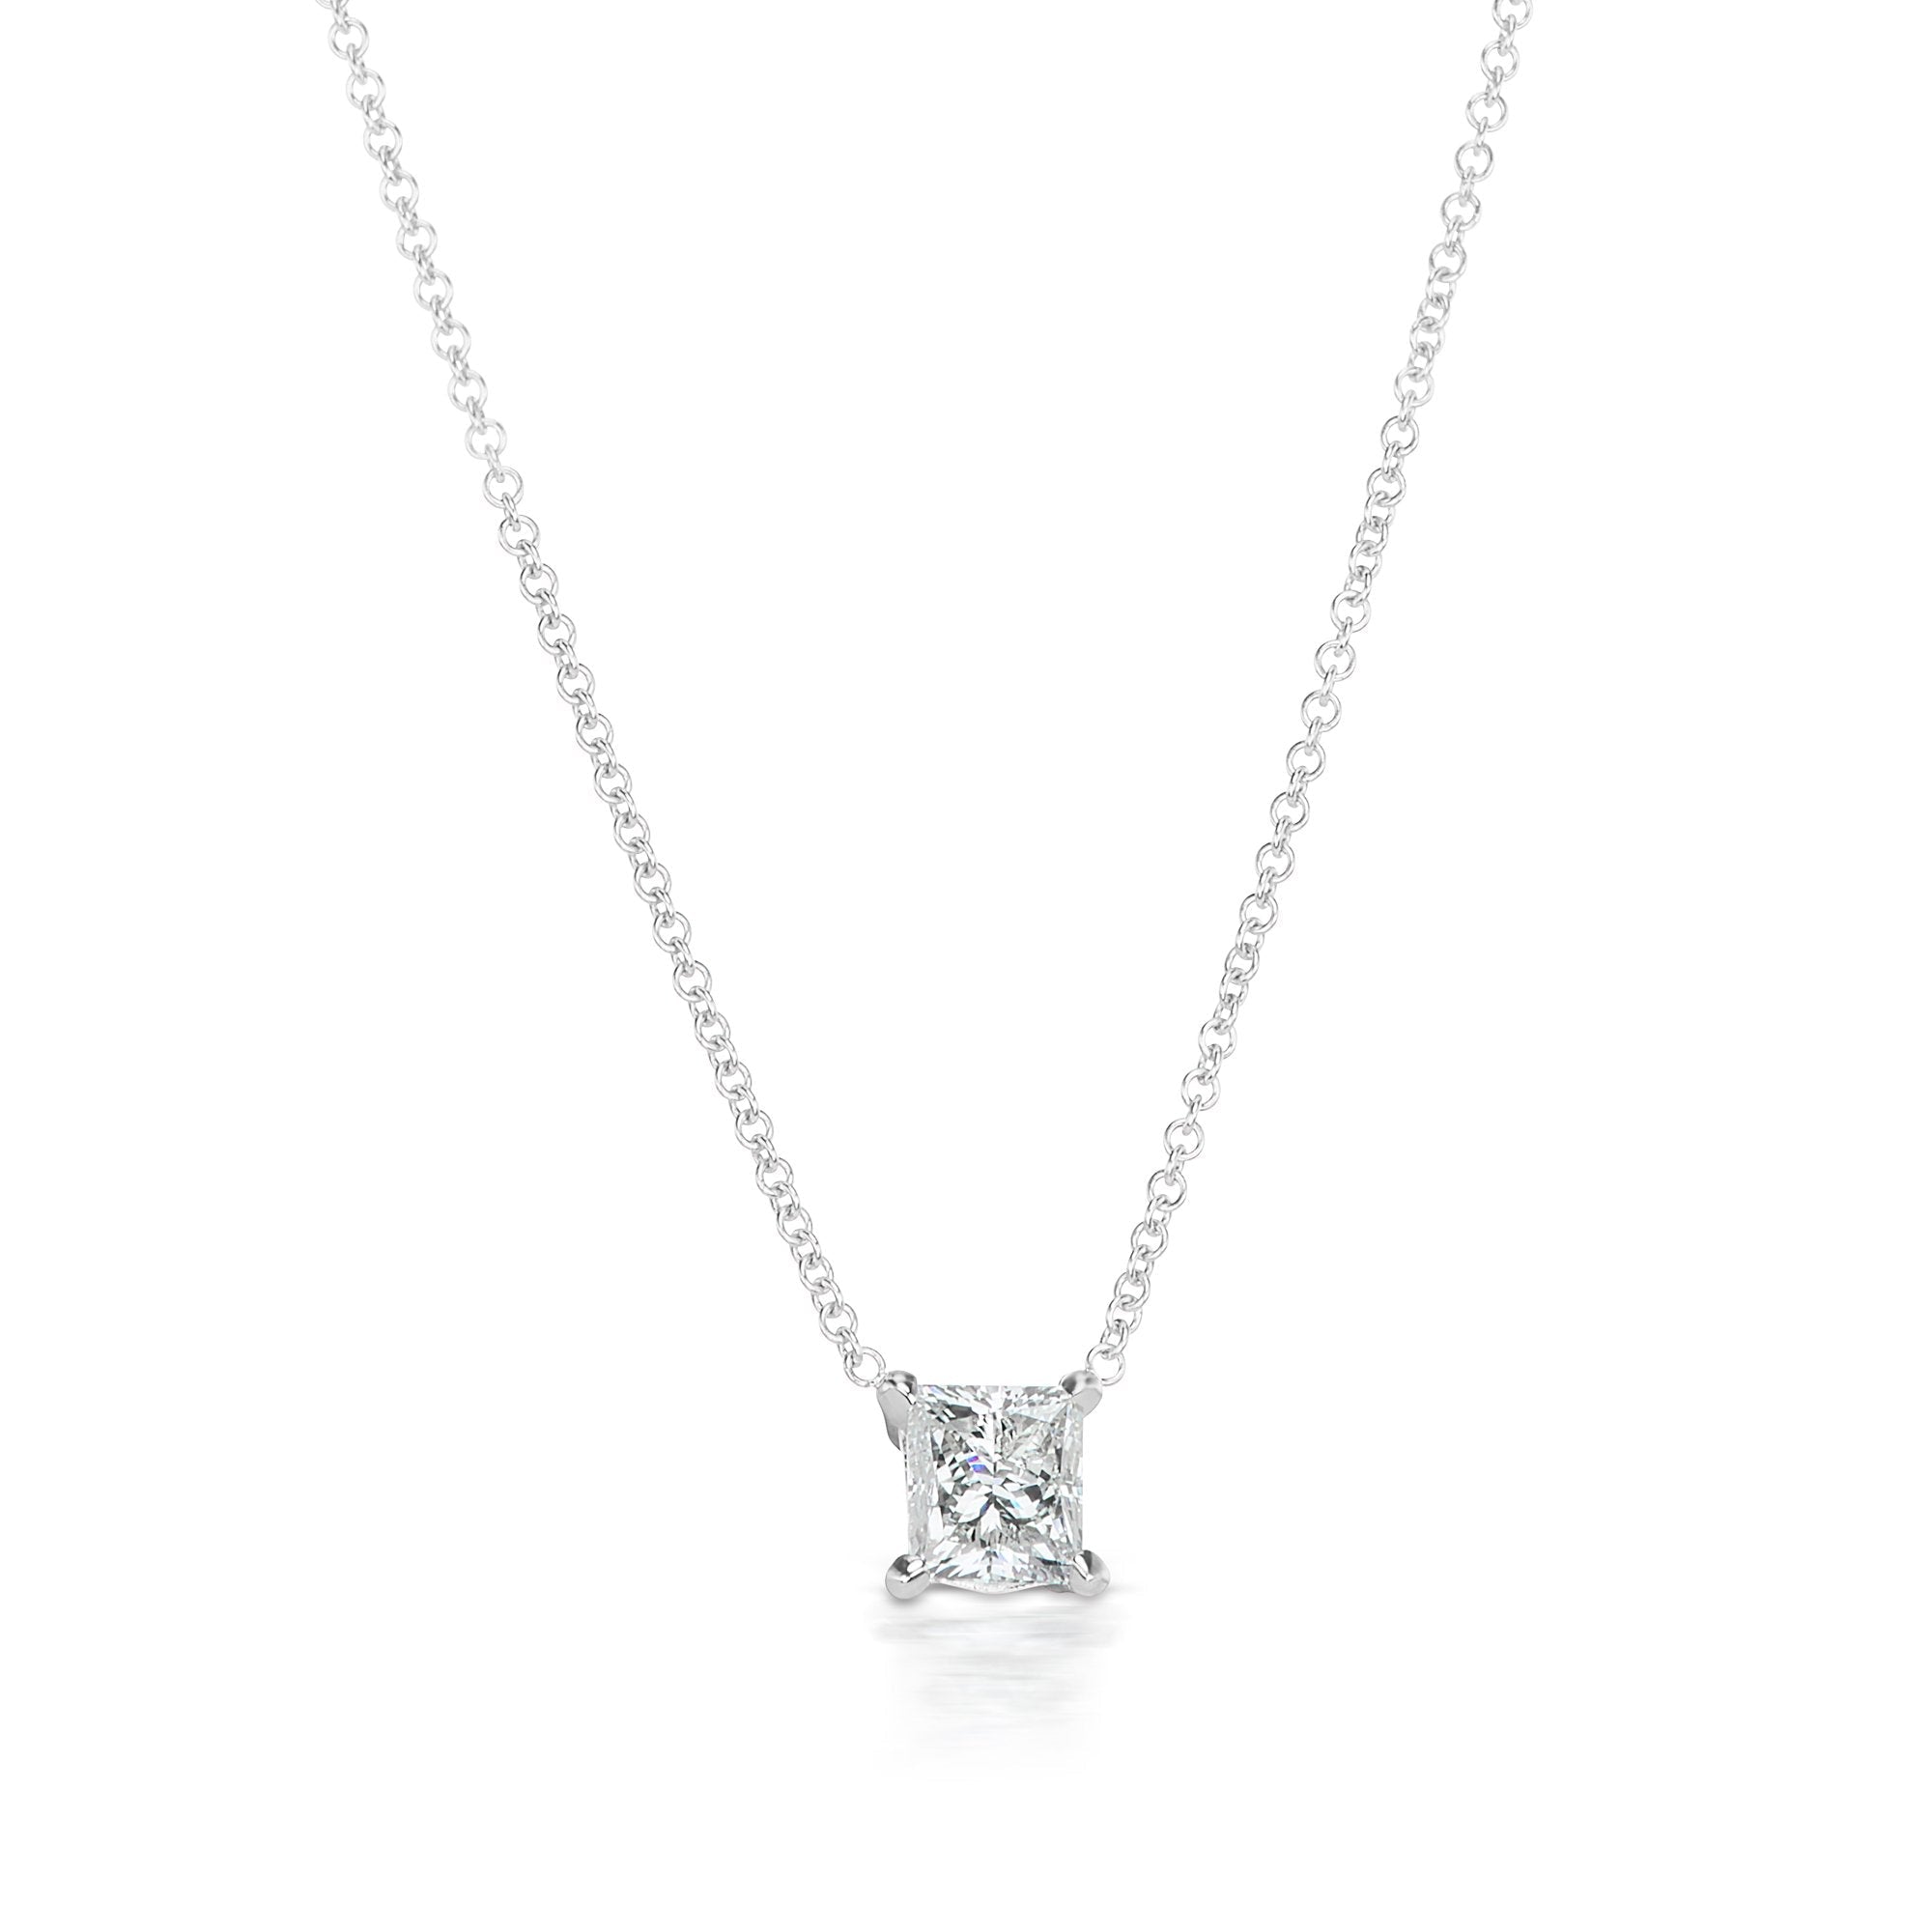 Diamond Necklace Princess Cut 1 Carat Solitaire Necklace in 14K White Gold Front View